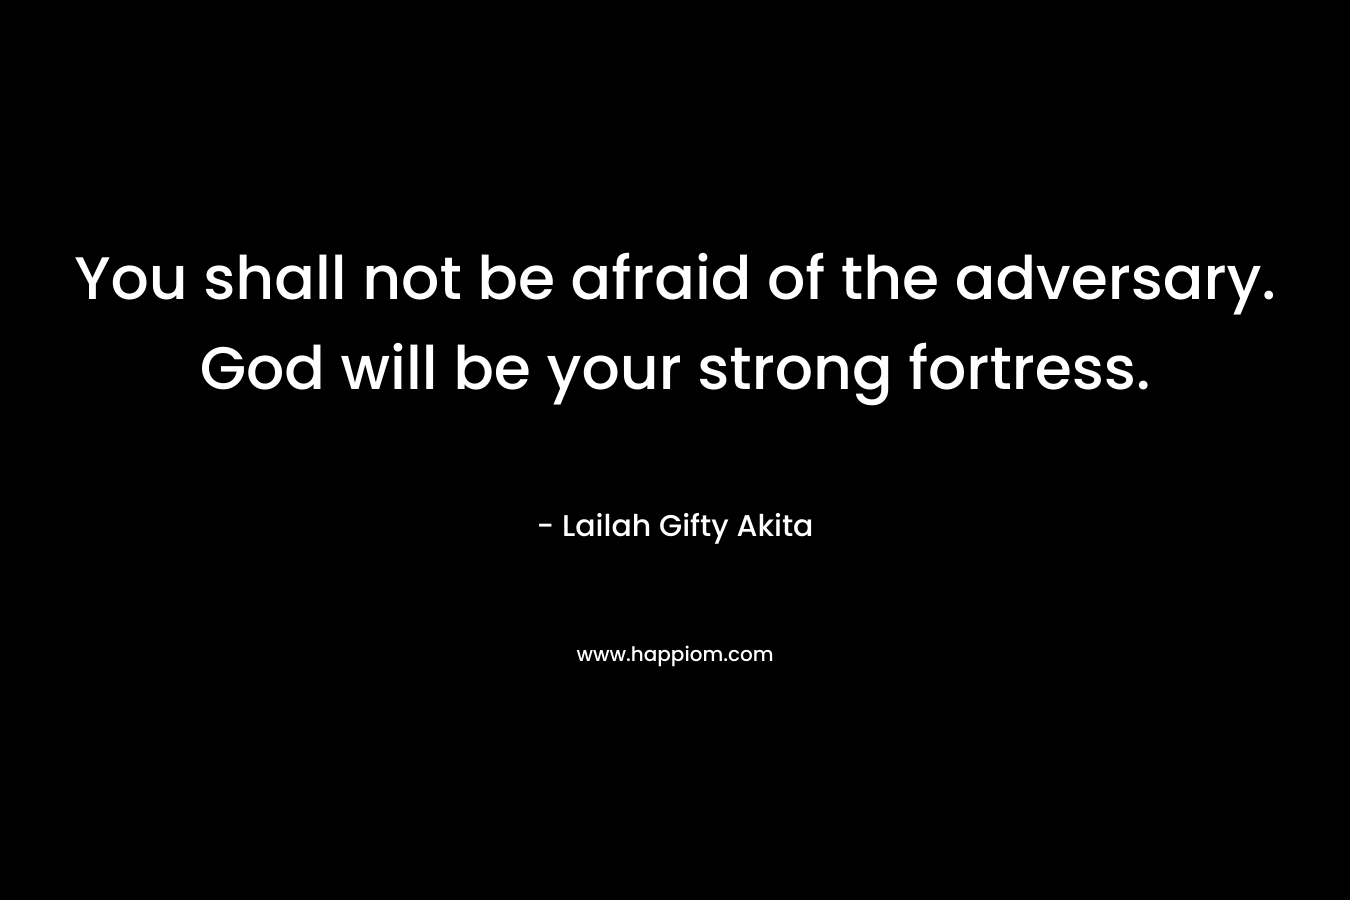 You shall not be afraid of the adversary. God will be your strong fortress. – Lailah Gifty Akita